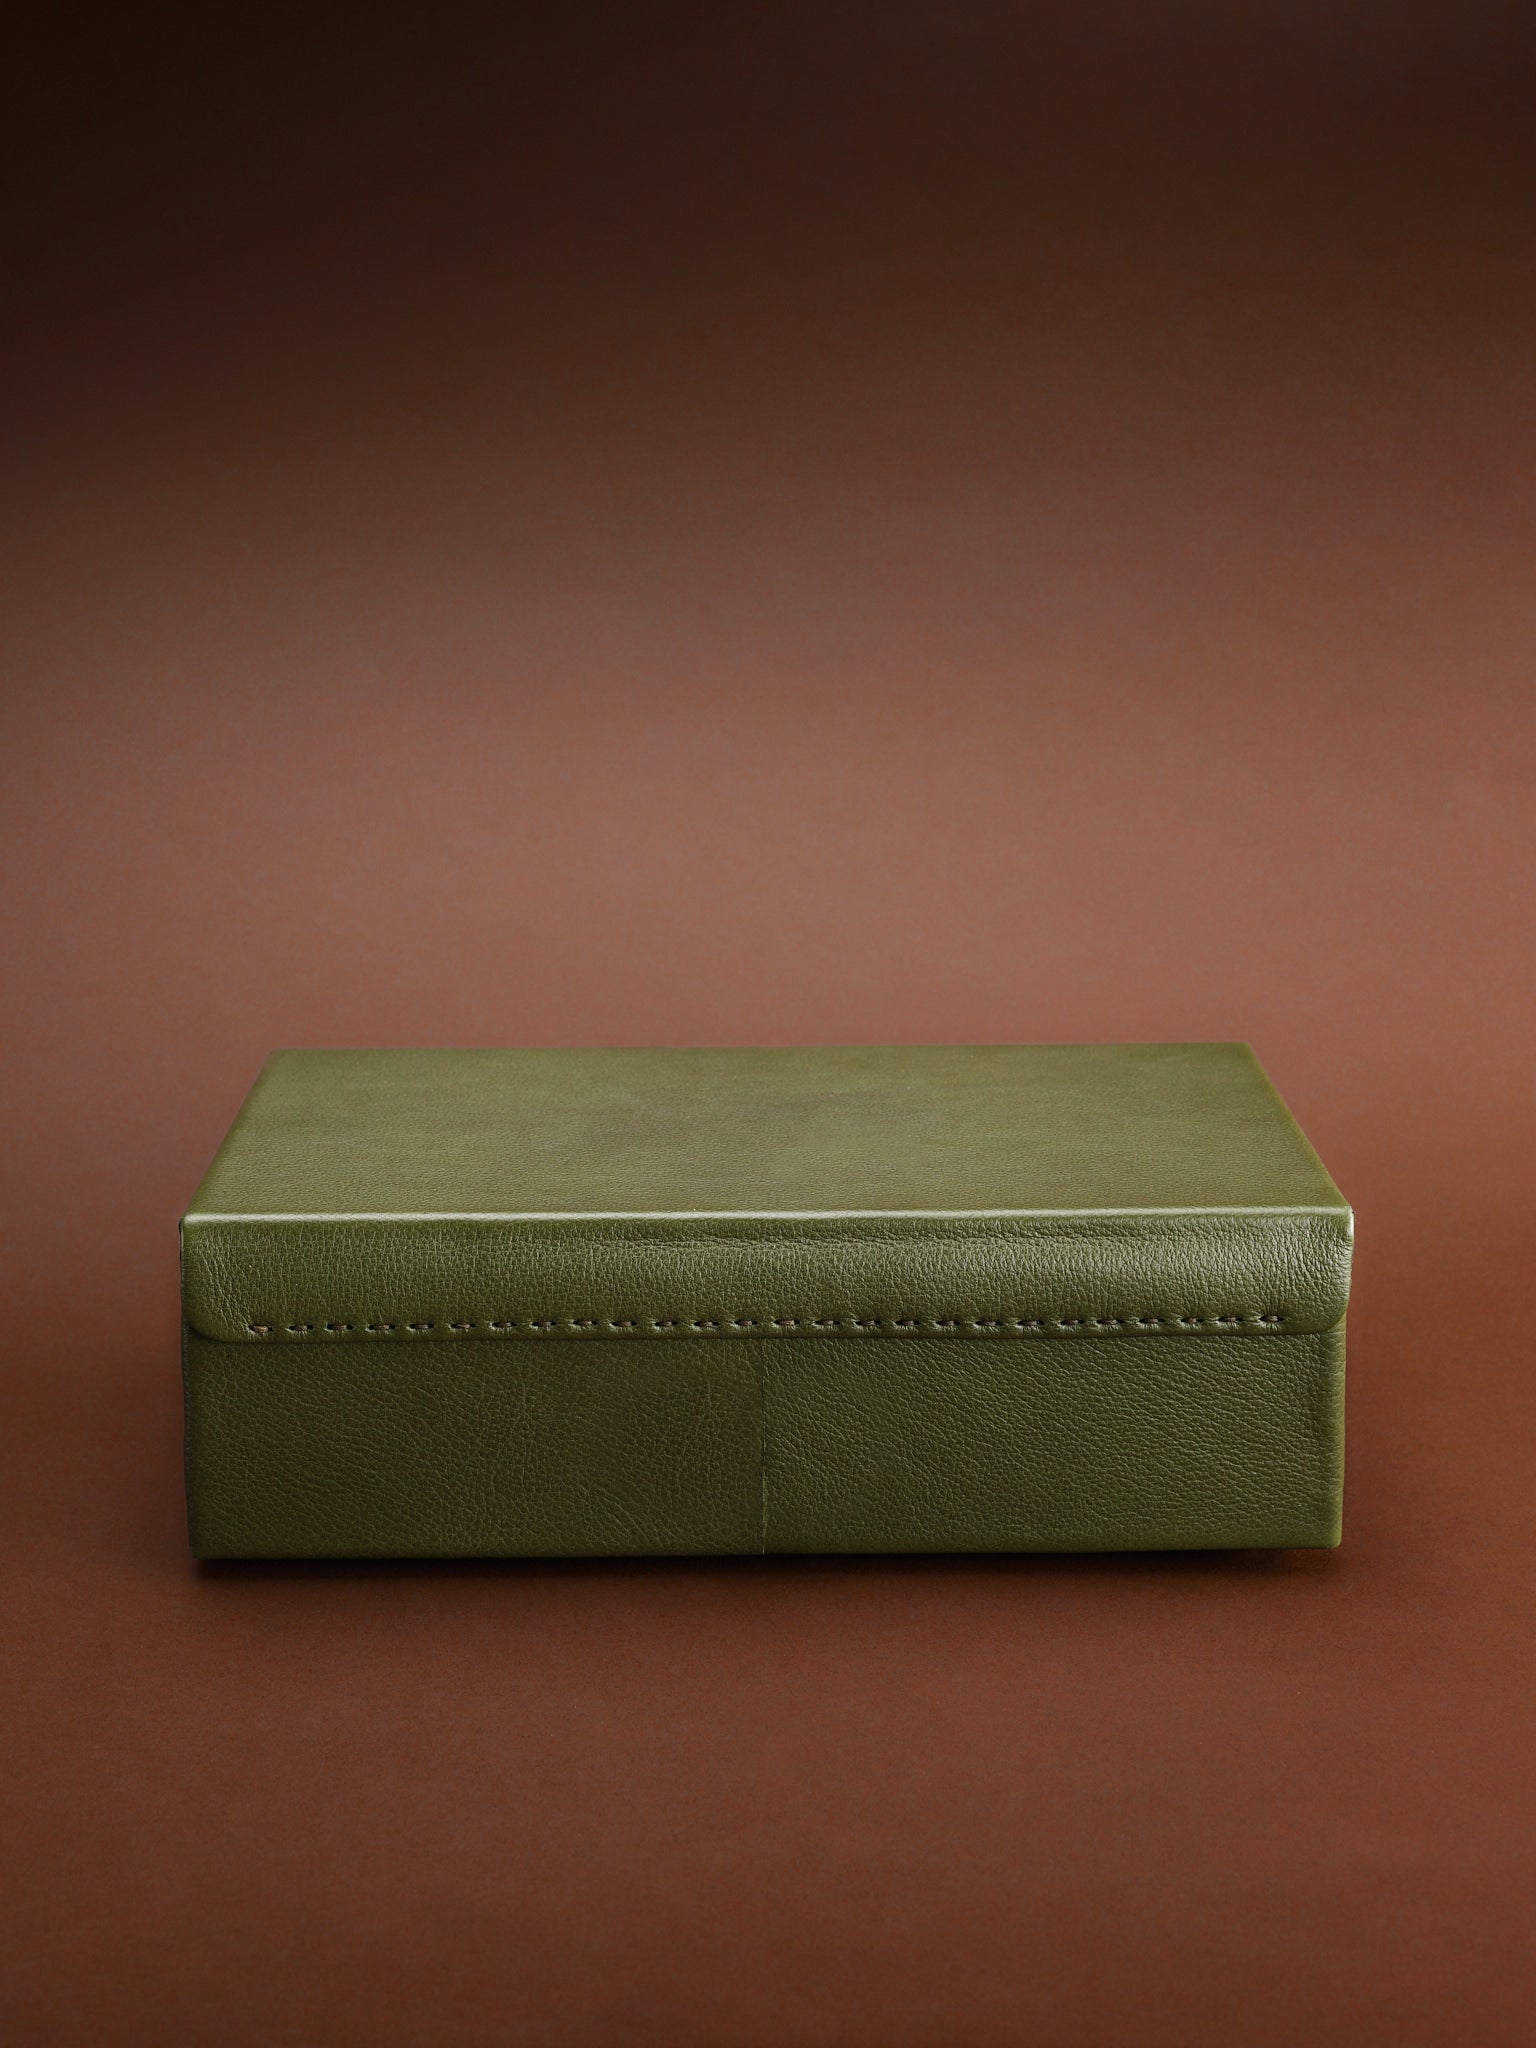 Hand-stitched Hinge. Best Watch Box Green by Capra Leather